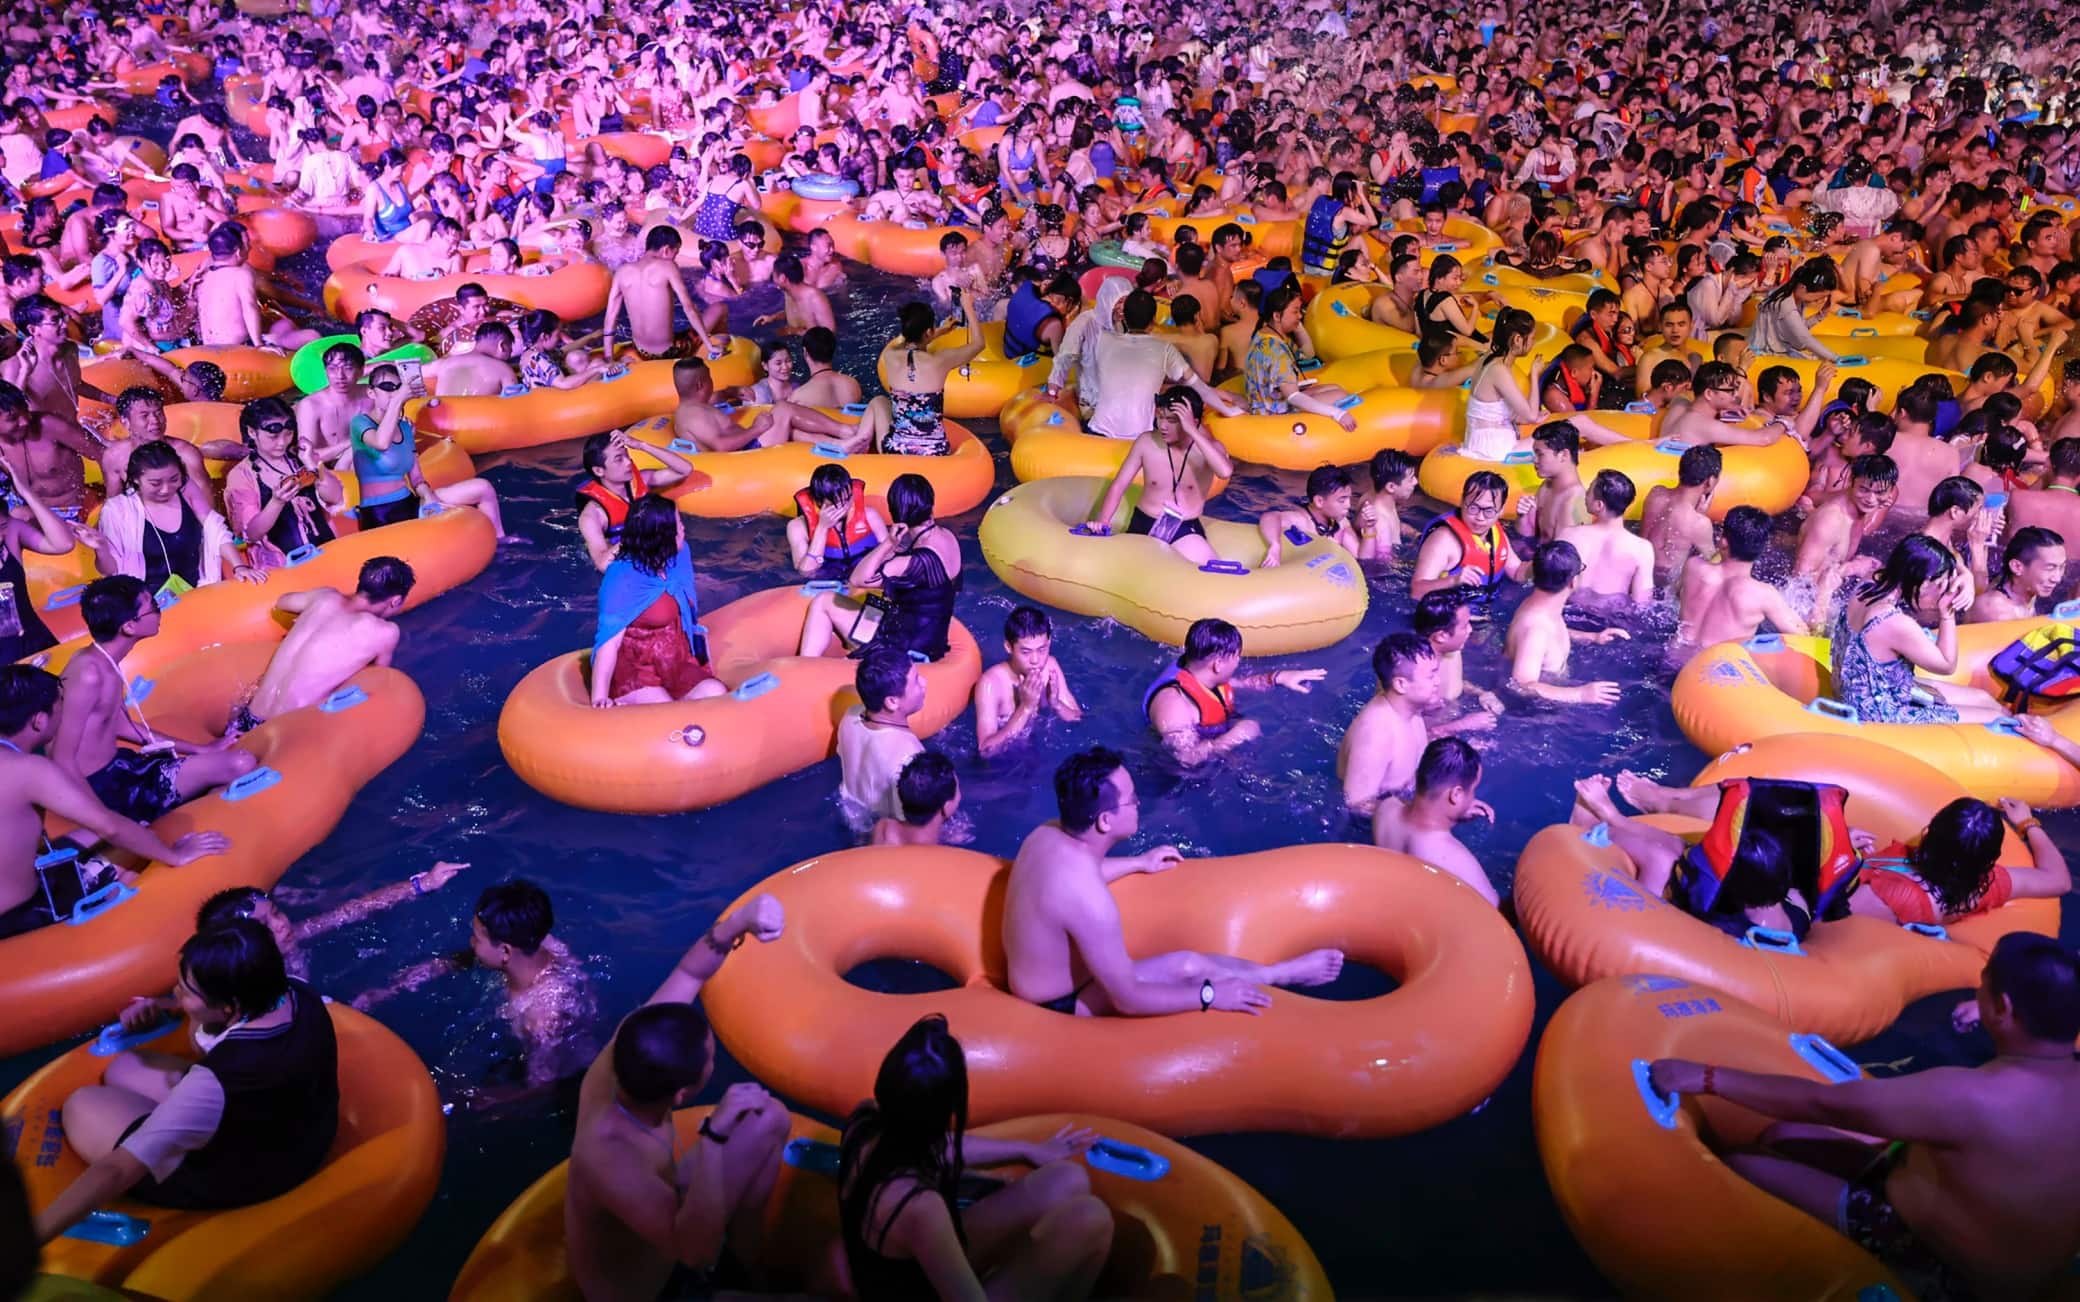 TOPSHOT - This photo taken on August 15, 2020 shows people watching a performance as they cool off in a swimming pool in Wuhan in China's central Hubei province. (Photo by STR / AFP) / China OUT (Photo by STR/AFP via Getty Images)